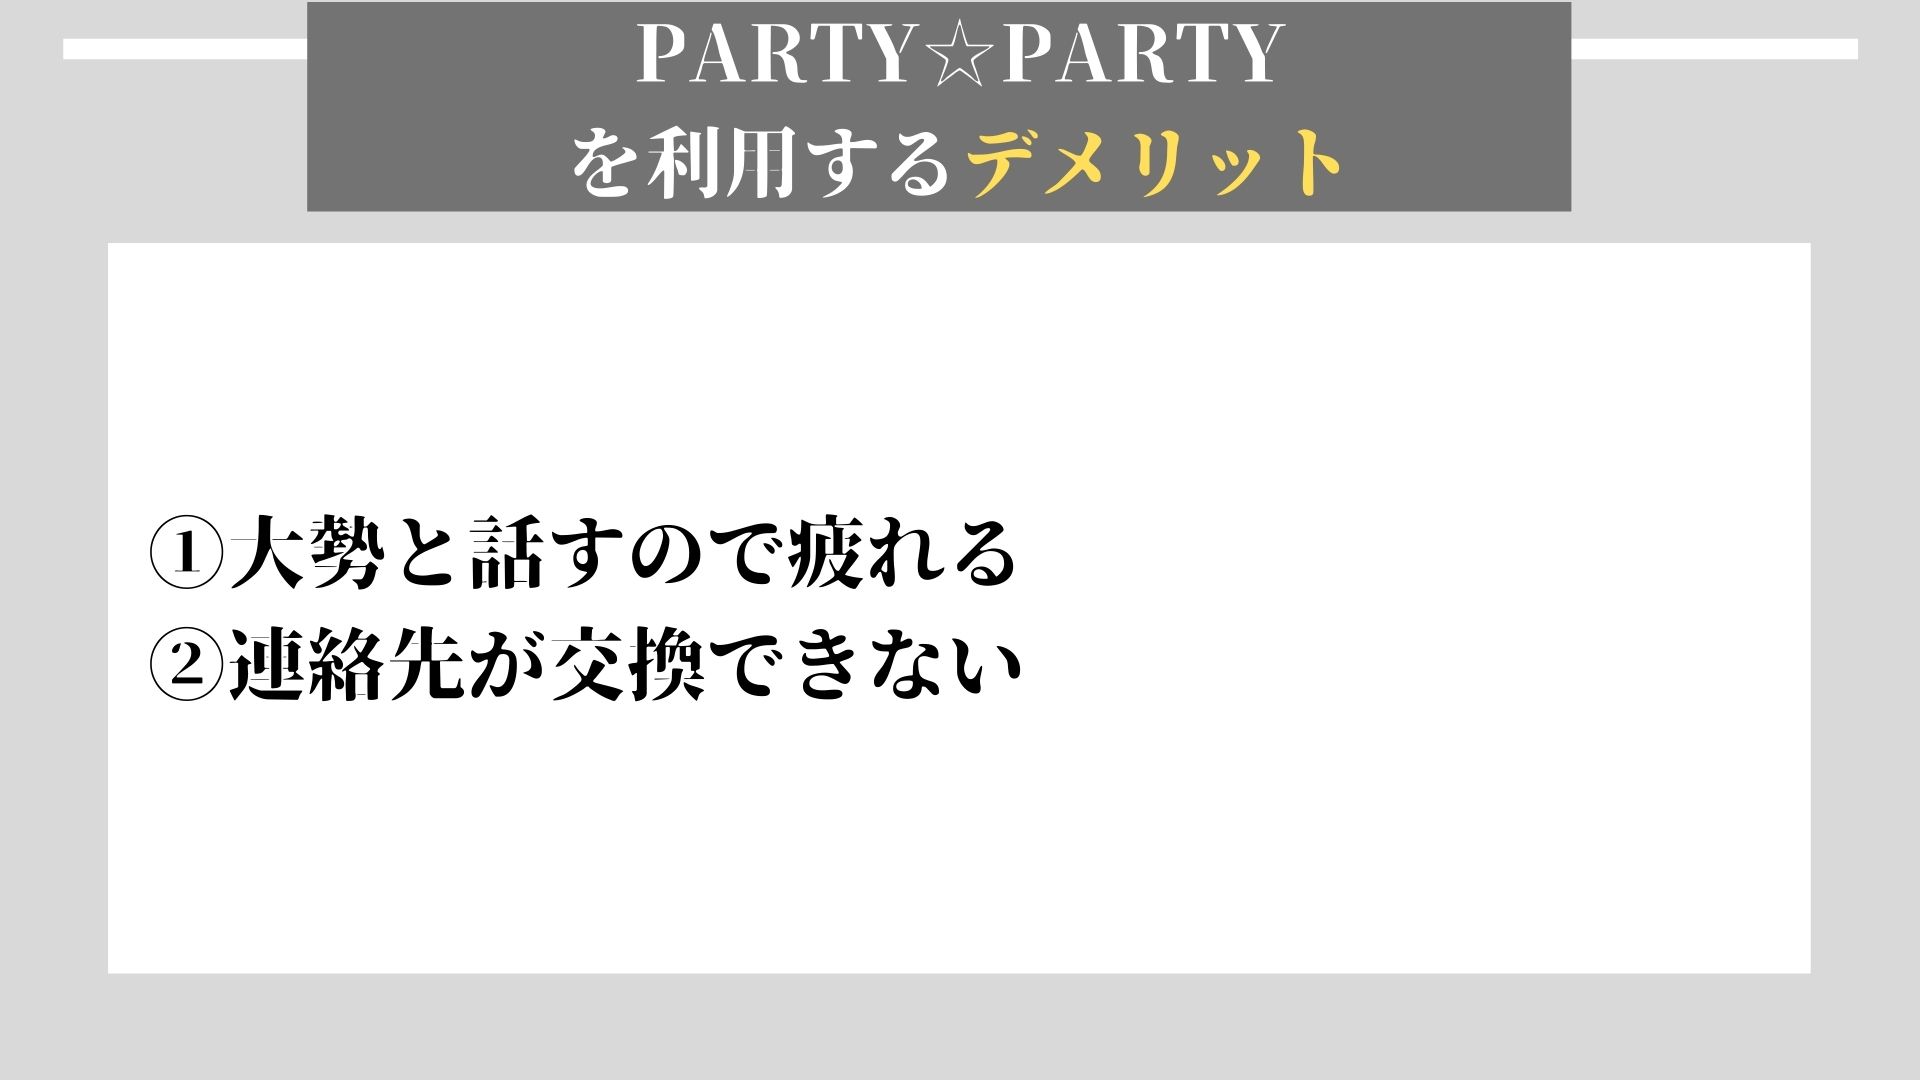 PARTY PARTY デメリット